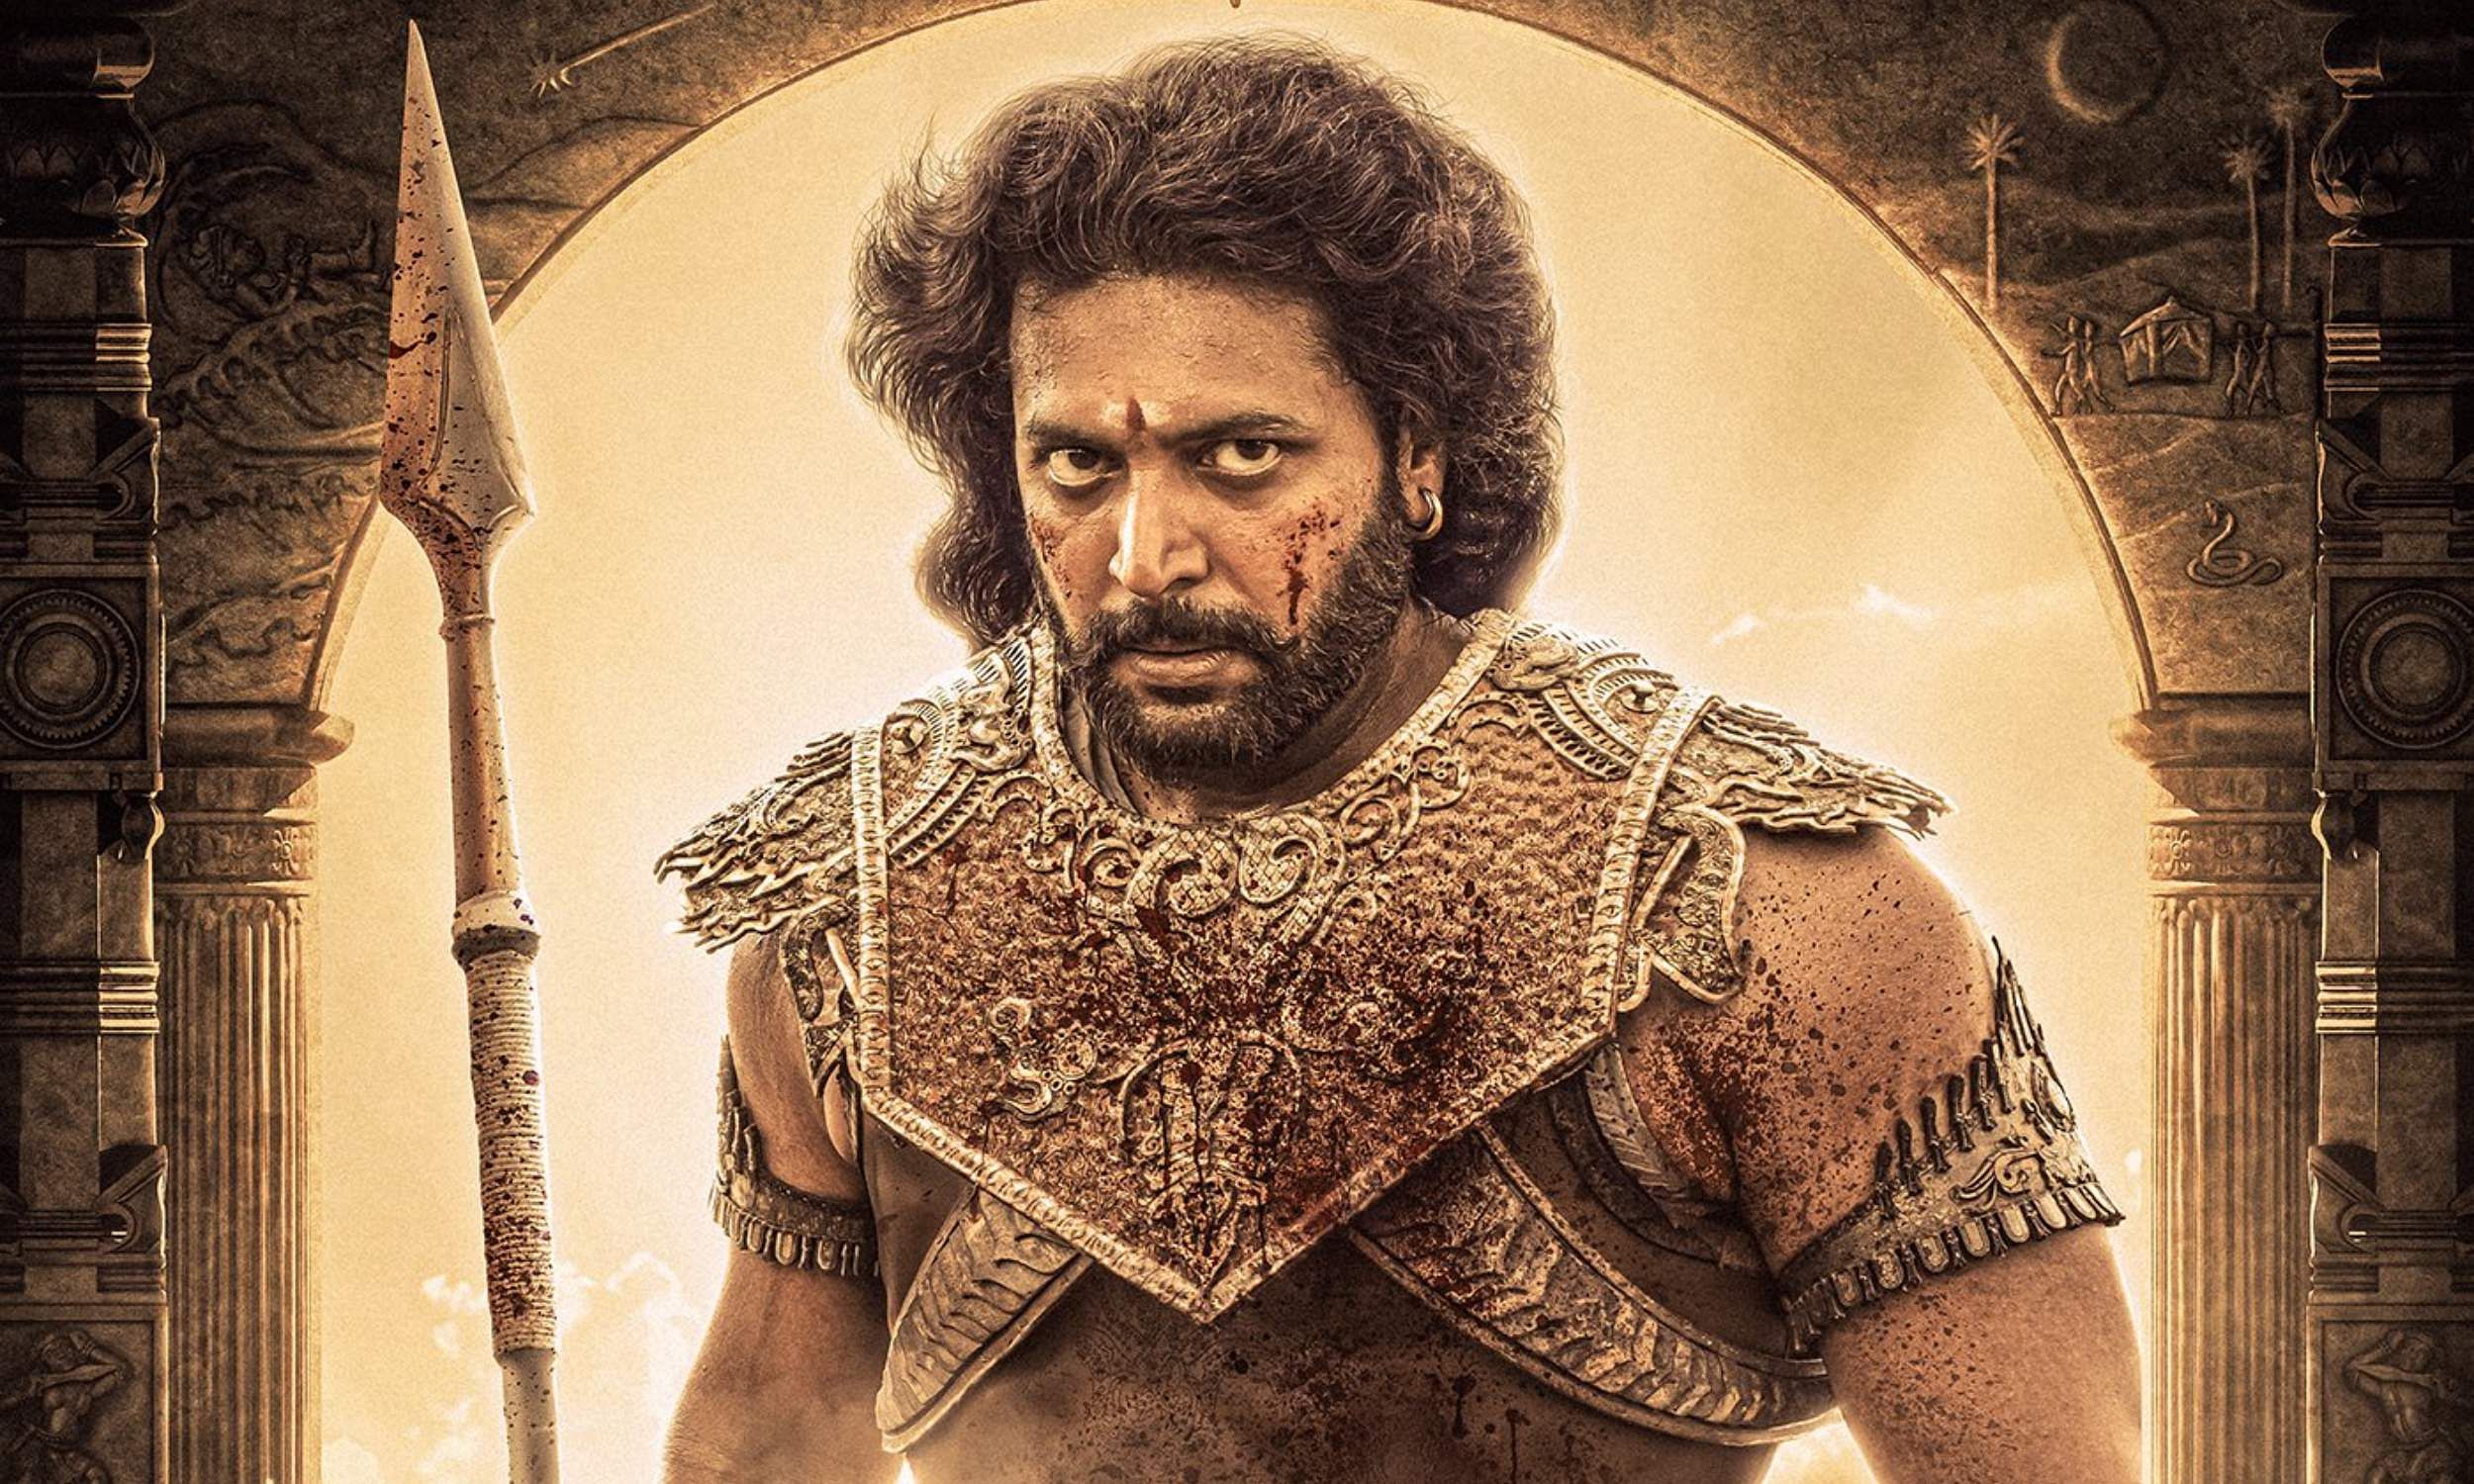 Here's a look into the journey of Jayam Ravi as Arunmozhi Varman from Ponniyin Selvan